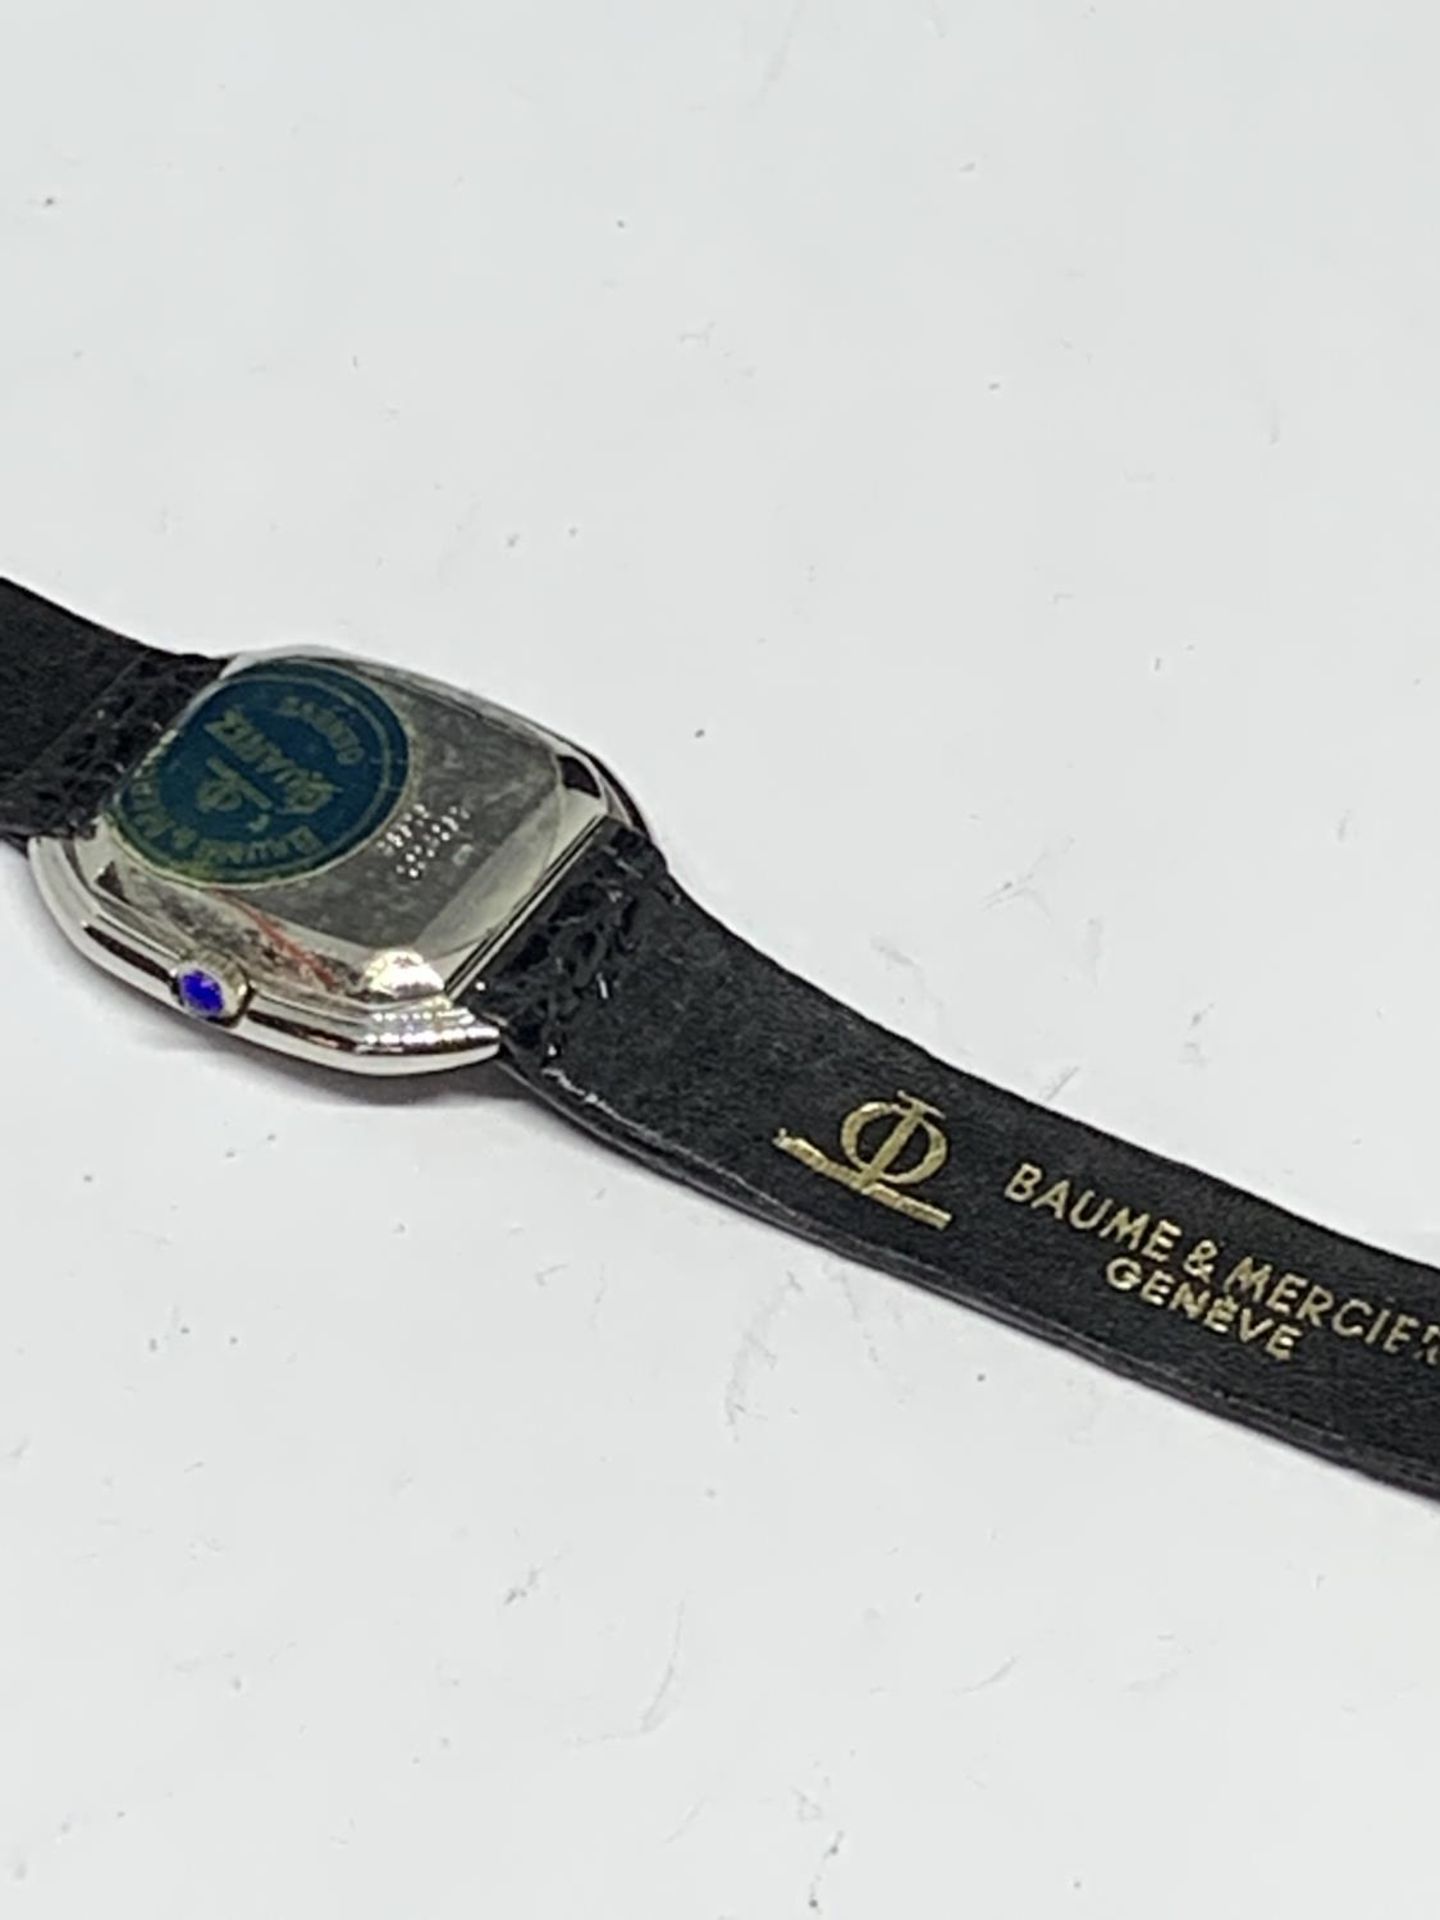 A BAUME AND MERCIER WRIST WATCH - Image 3 of 4